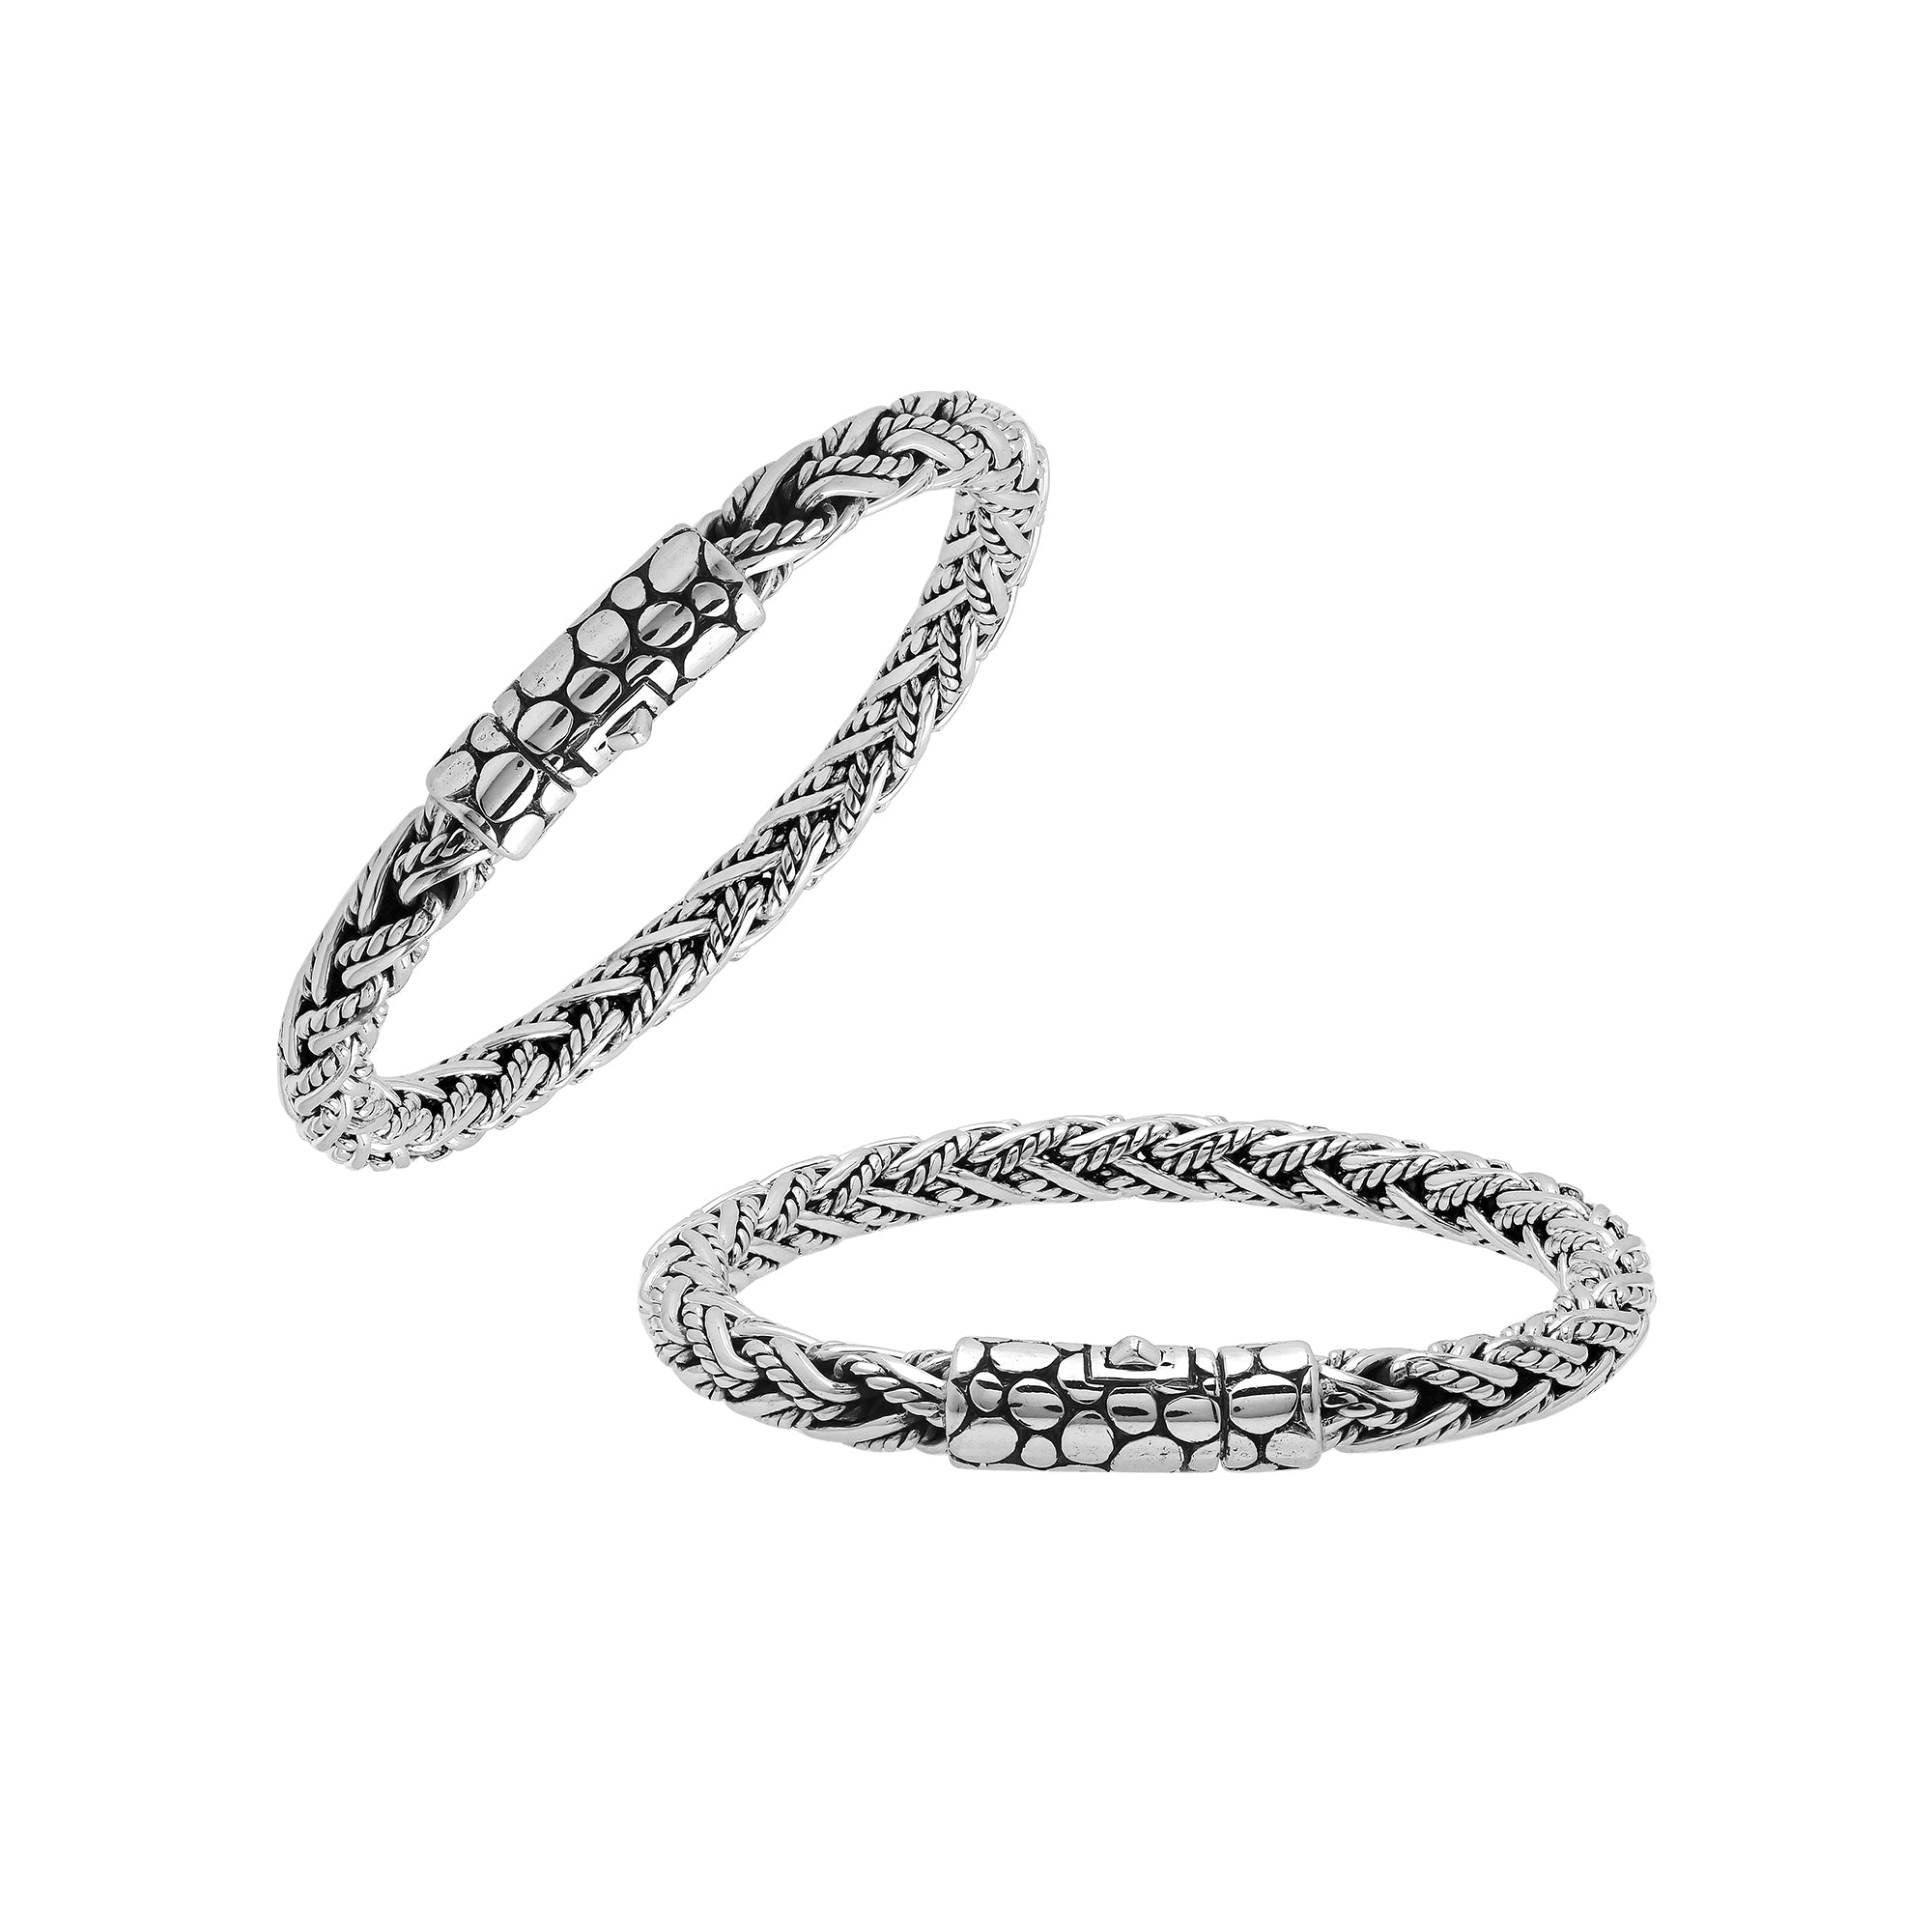 AB-1178-S-8" Sterling Silver Bracelet With Plain Silver